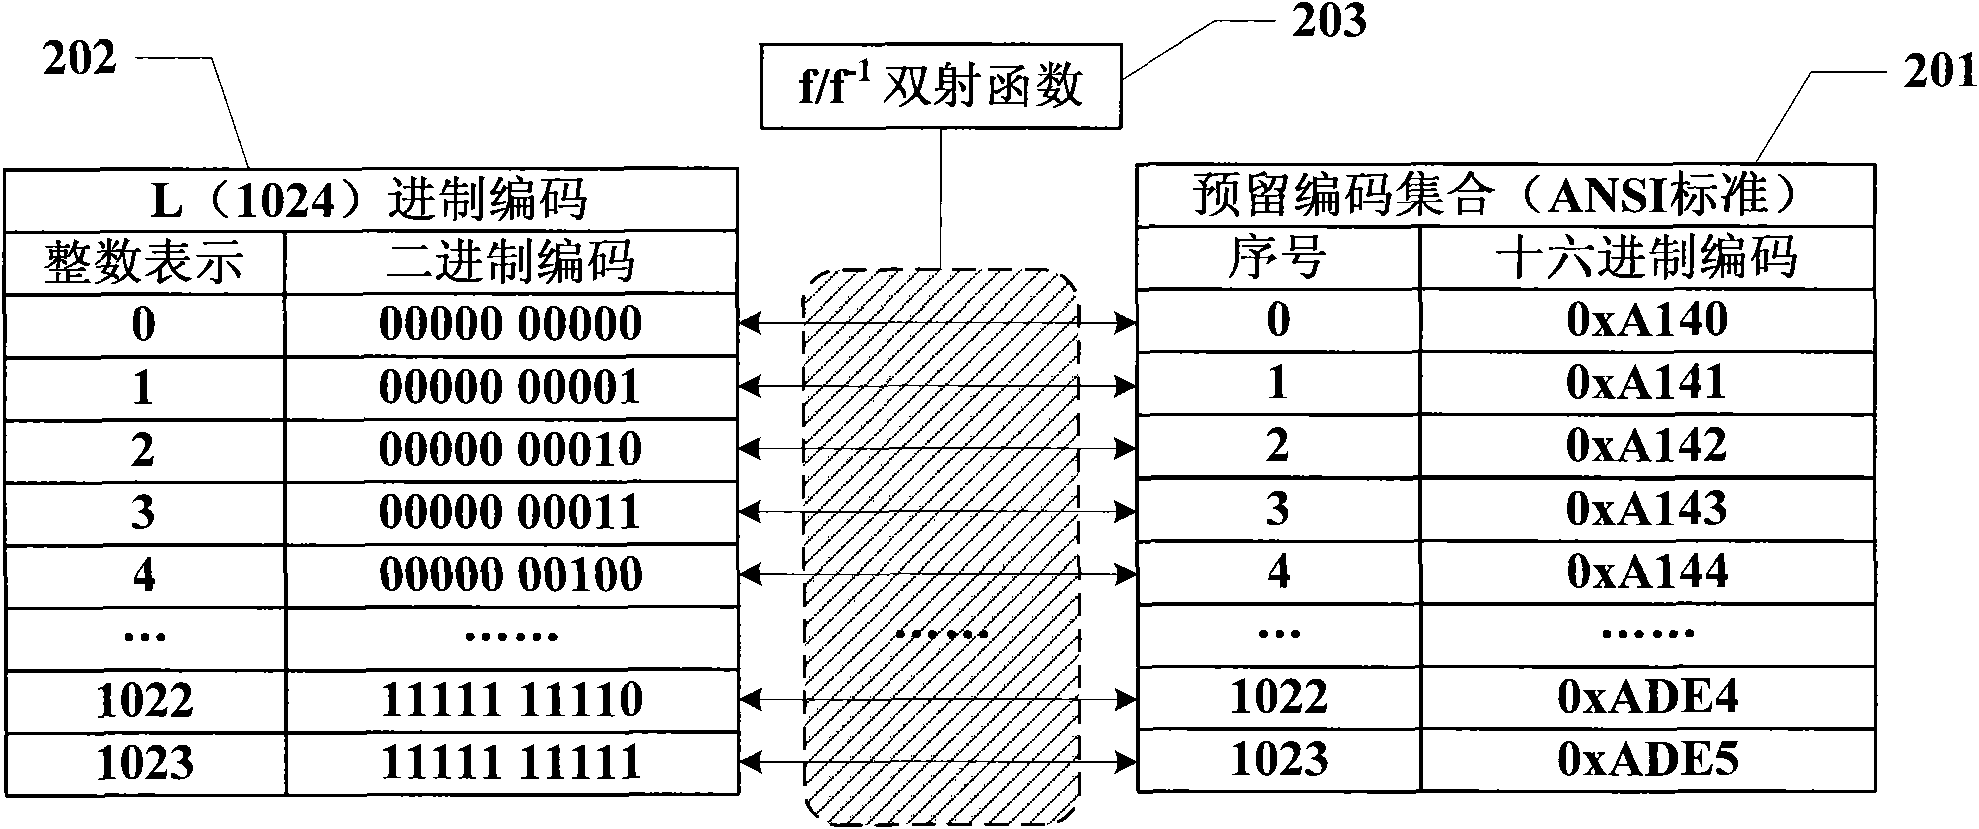 Information hiding method taking text information as carrier